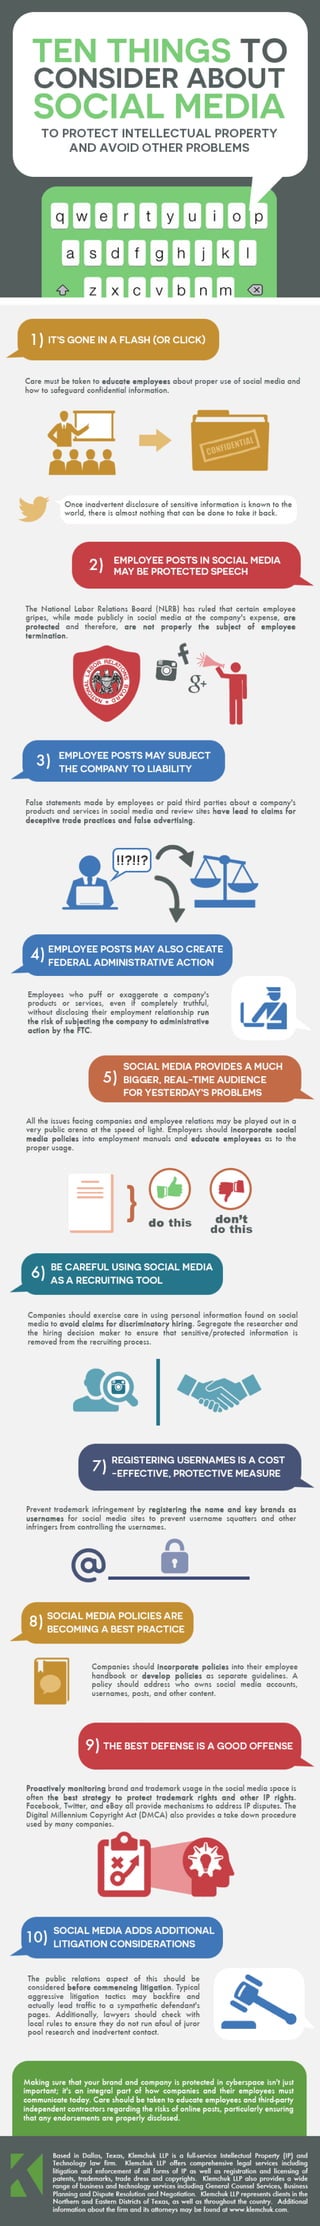 Ten Things to Consider About Social Media